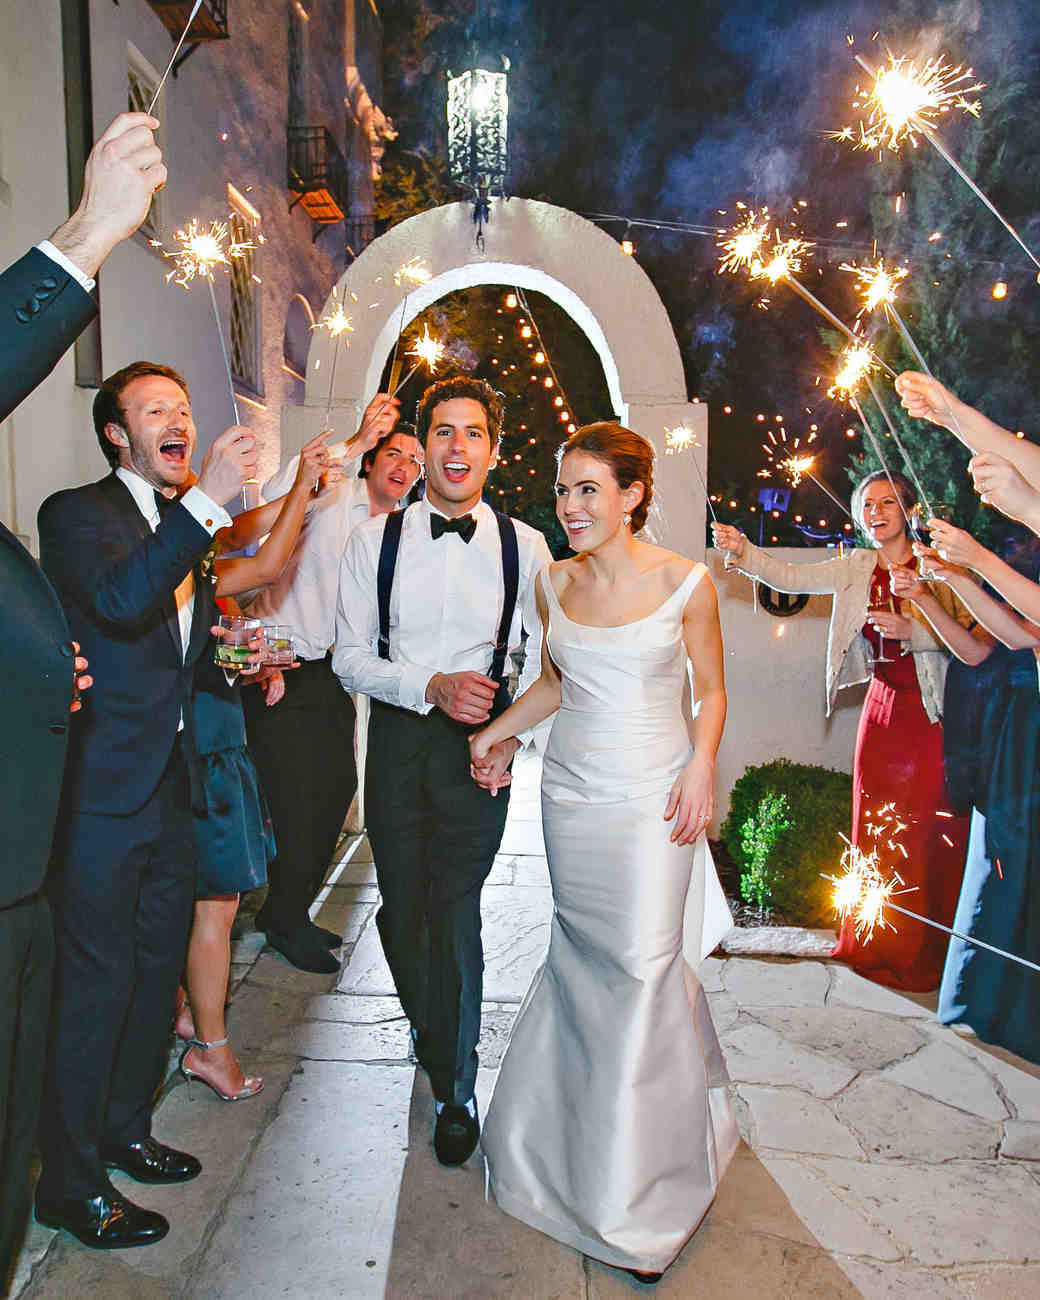 Photographing Sparklers At A Wedding
 Amazing Fireworks and Sparklers from Real Weddings